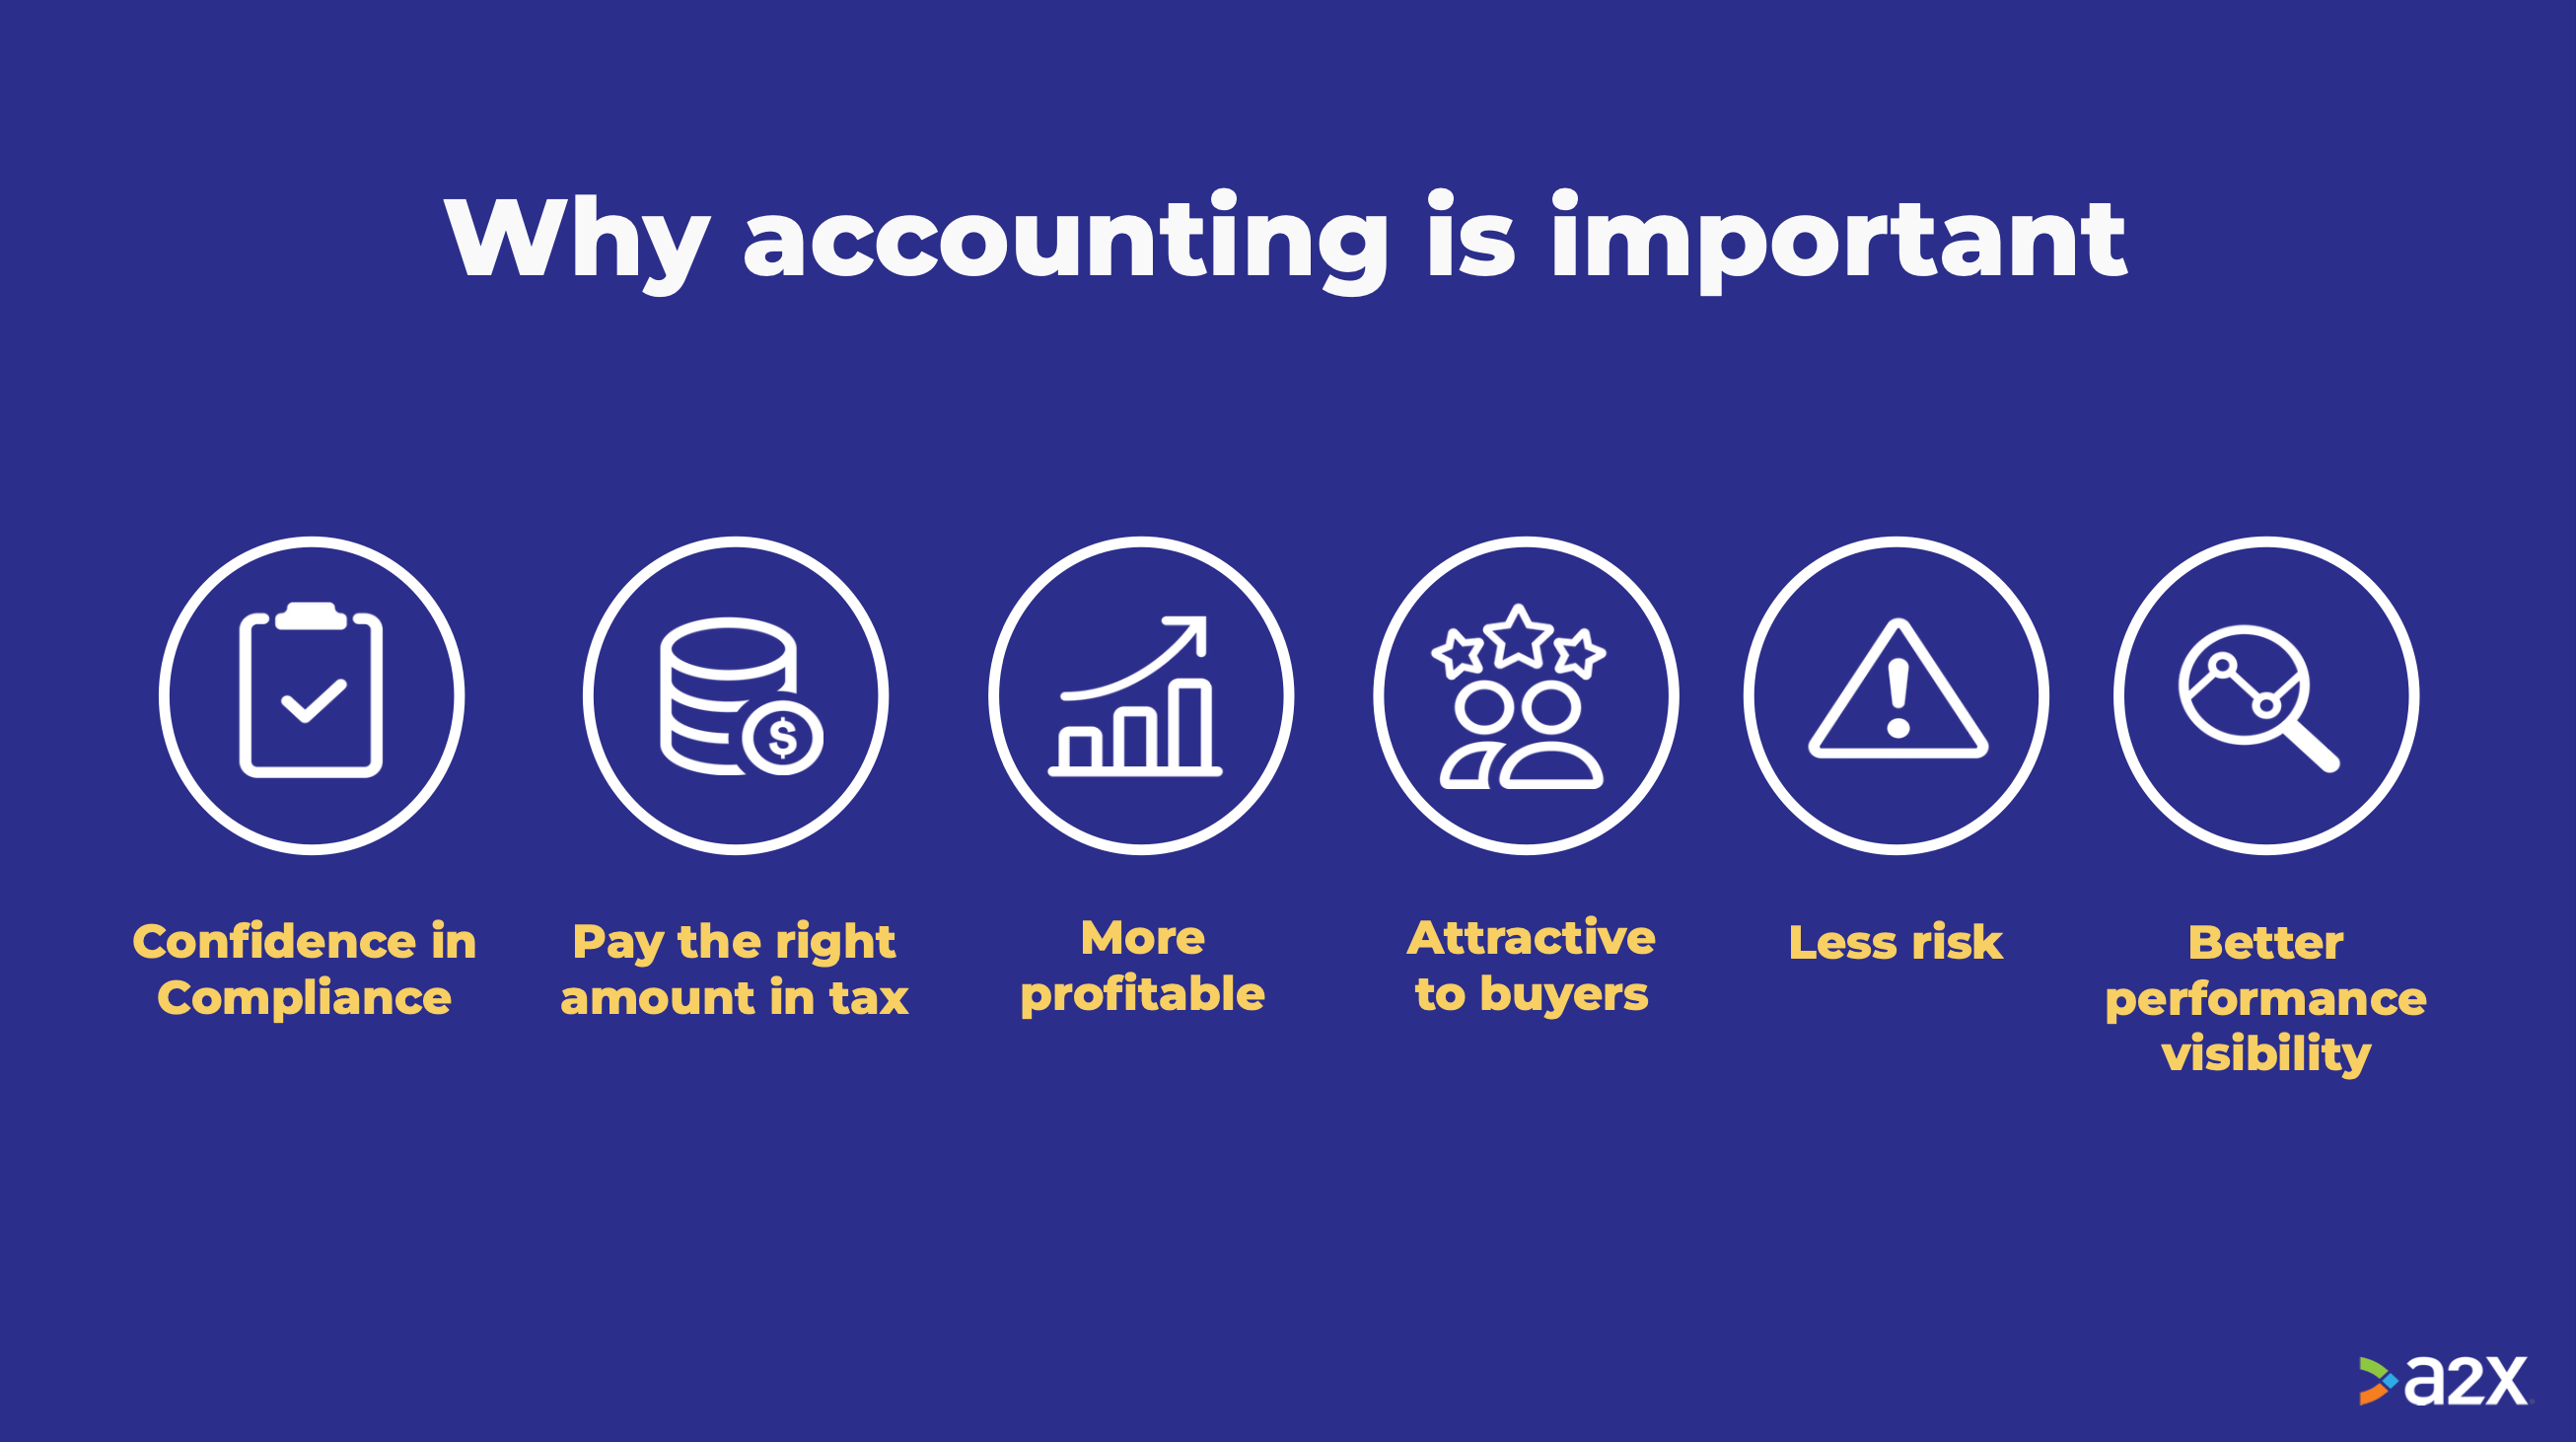 Why accurate accounting in important